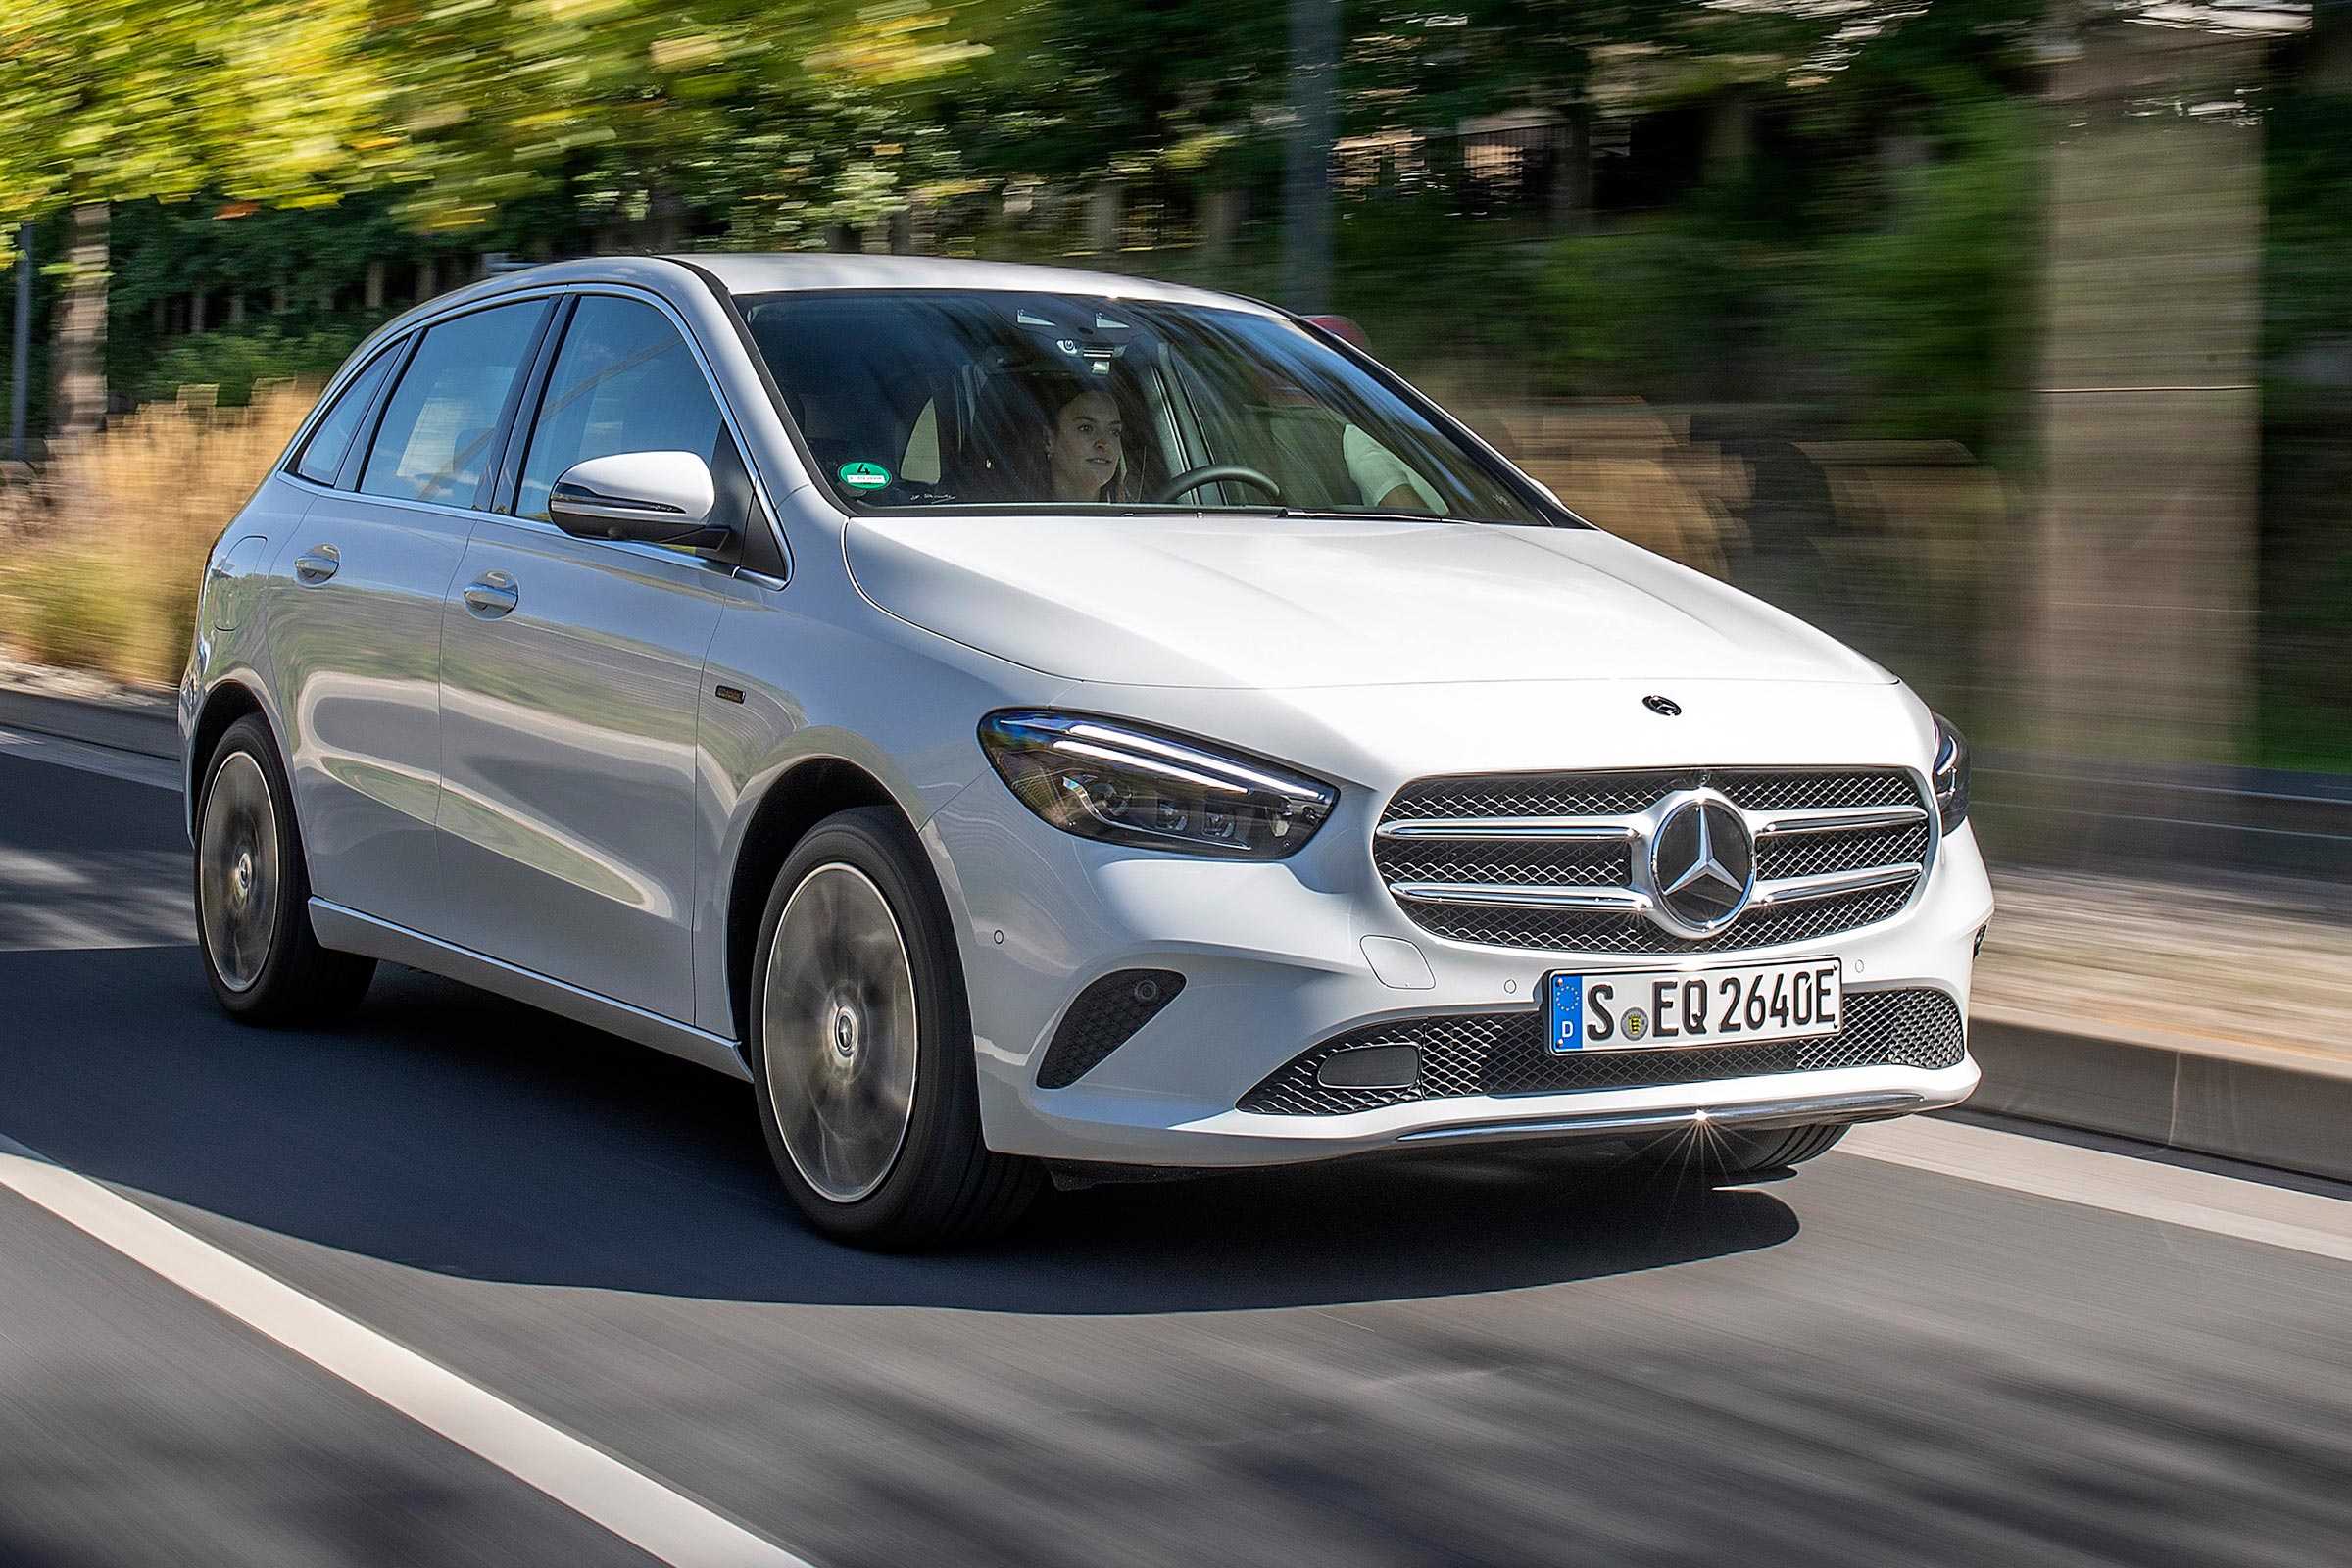 Mercedes BClass hybrid pricing, specification and release date